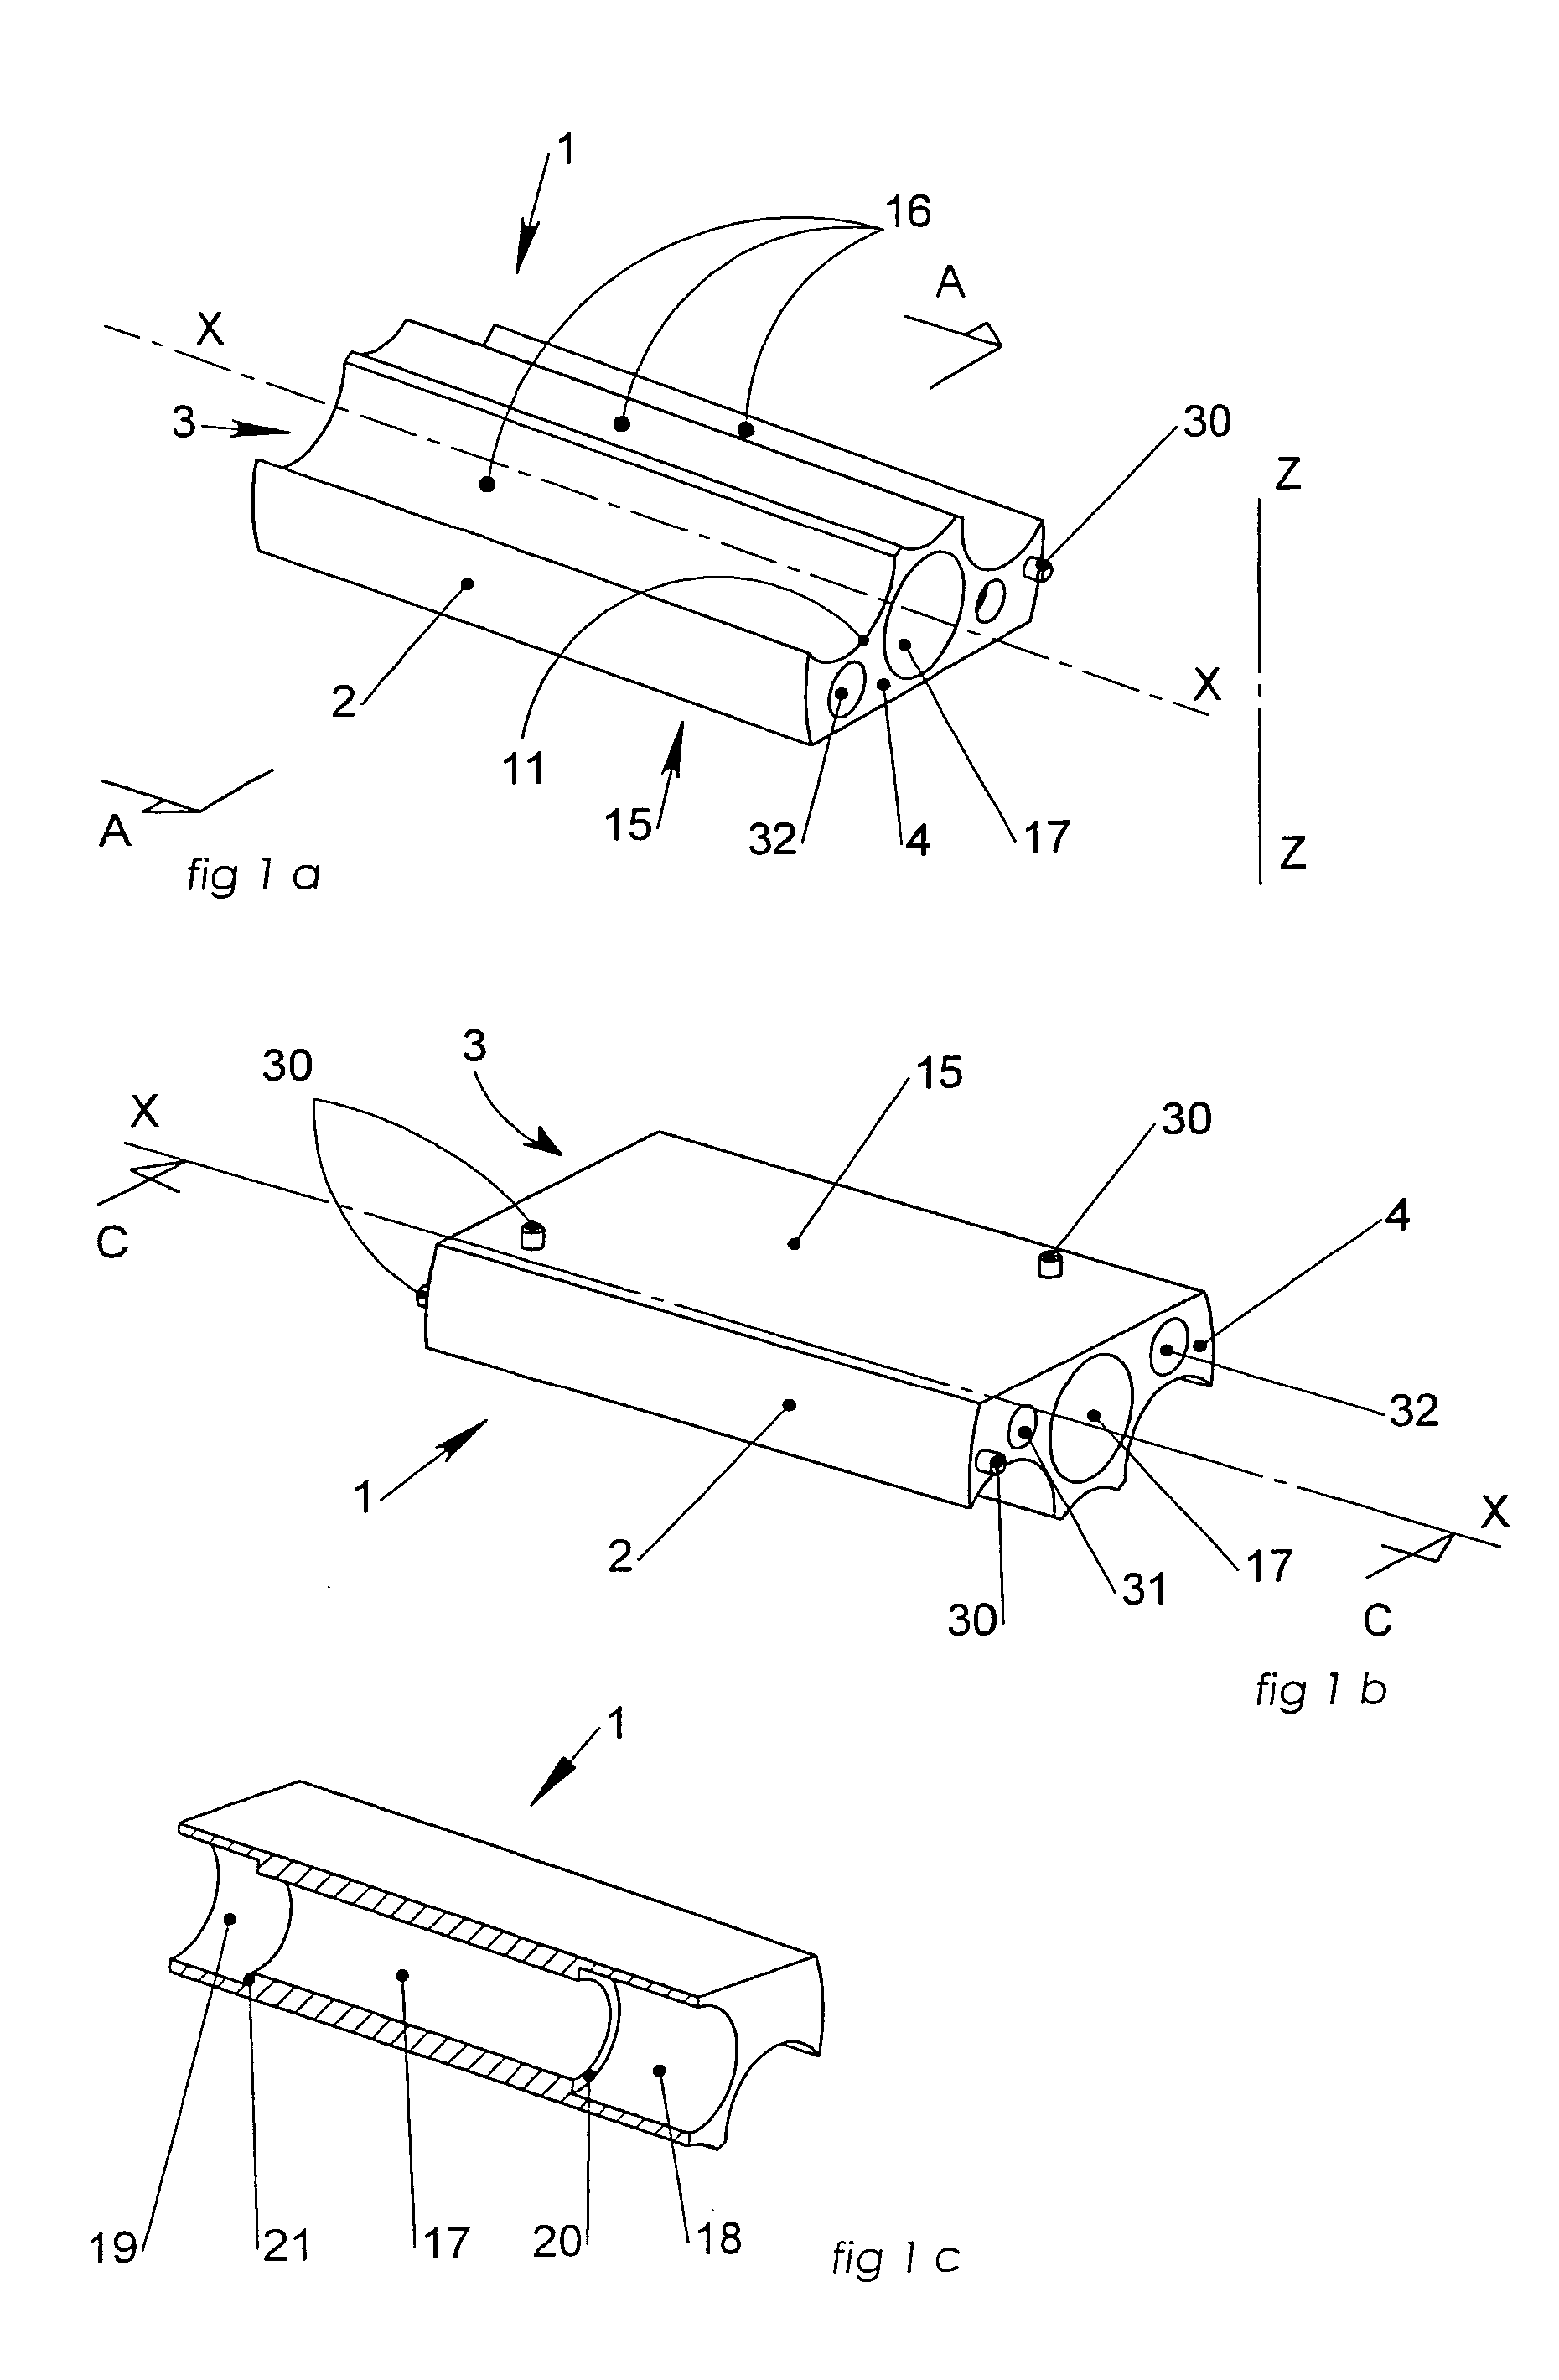 Support for electrical/electronic structure and/or electrical power supply structure for a hand dynamometer tool, in particular for a torque wrench operating by breaking mechanical equilibrium